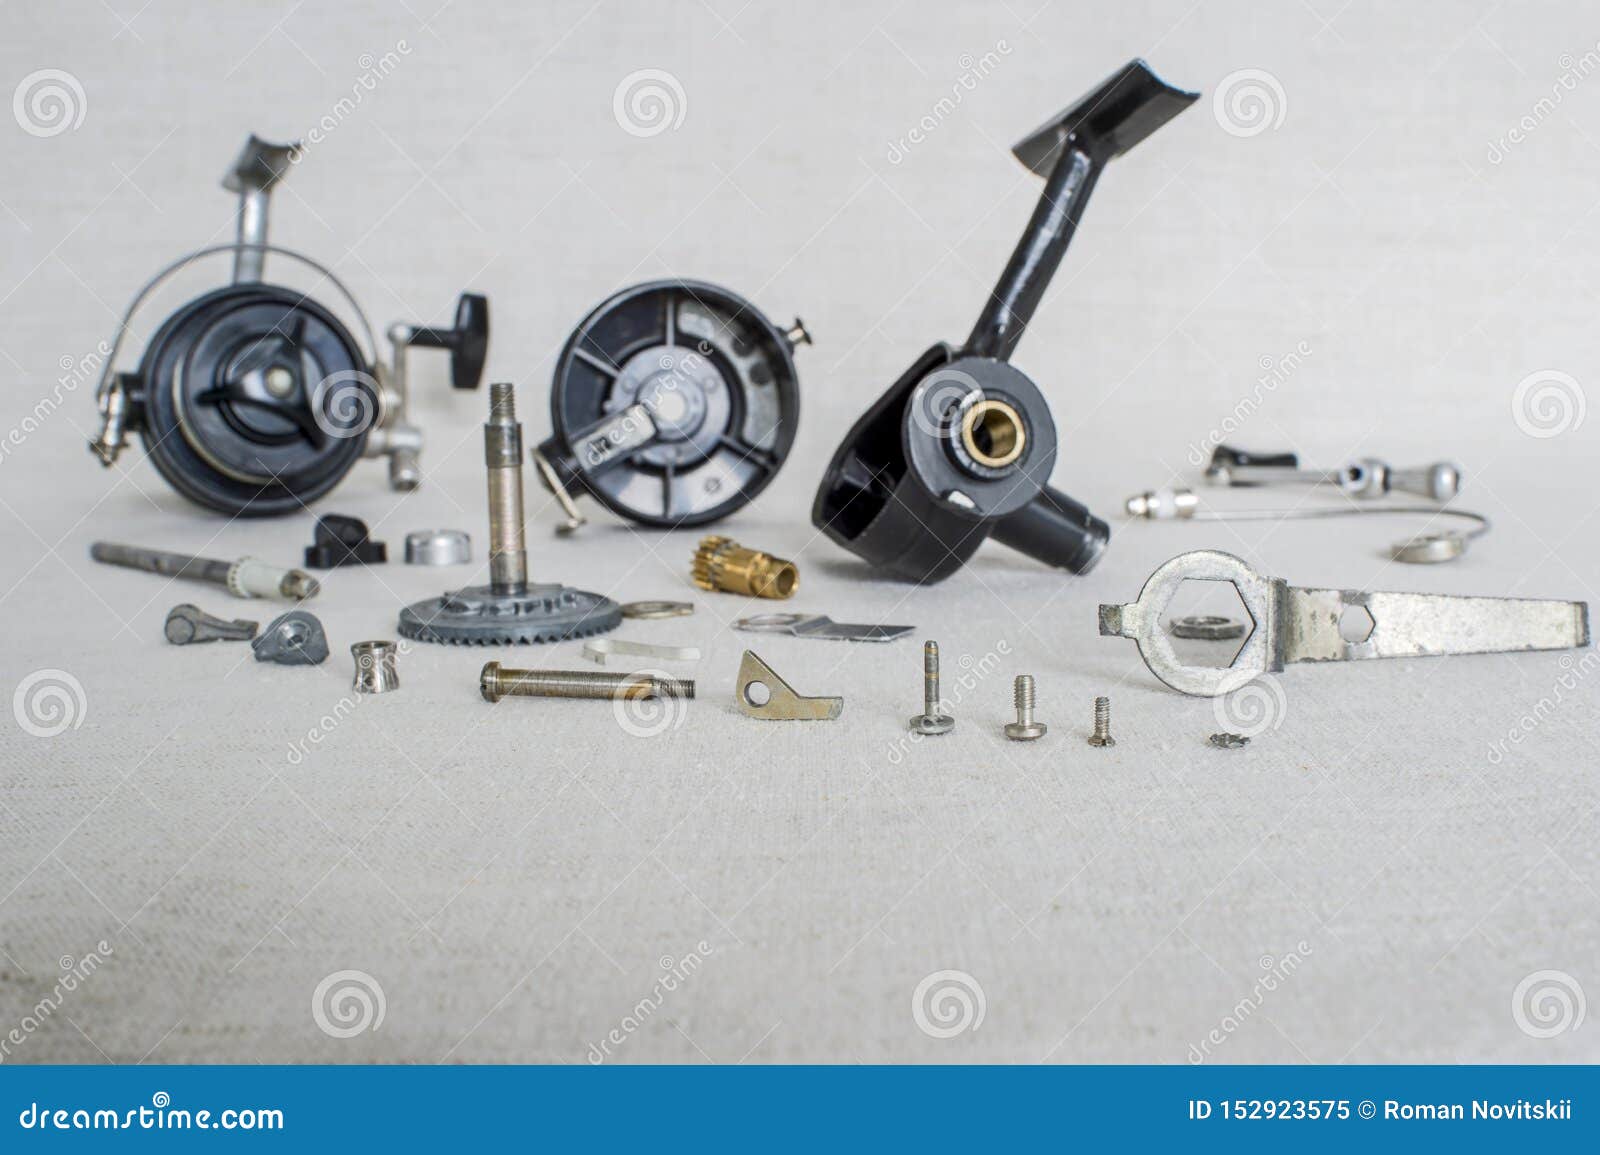 A Fishing Spinning Reel As a Whole and a Second Similar Completely  Disassembled. Concept: Parts of a Whole Stock Image - Image of season,  design: 152923575